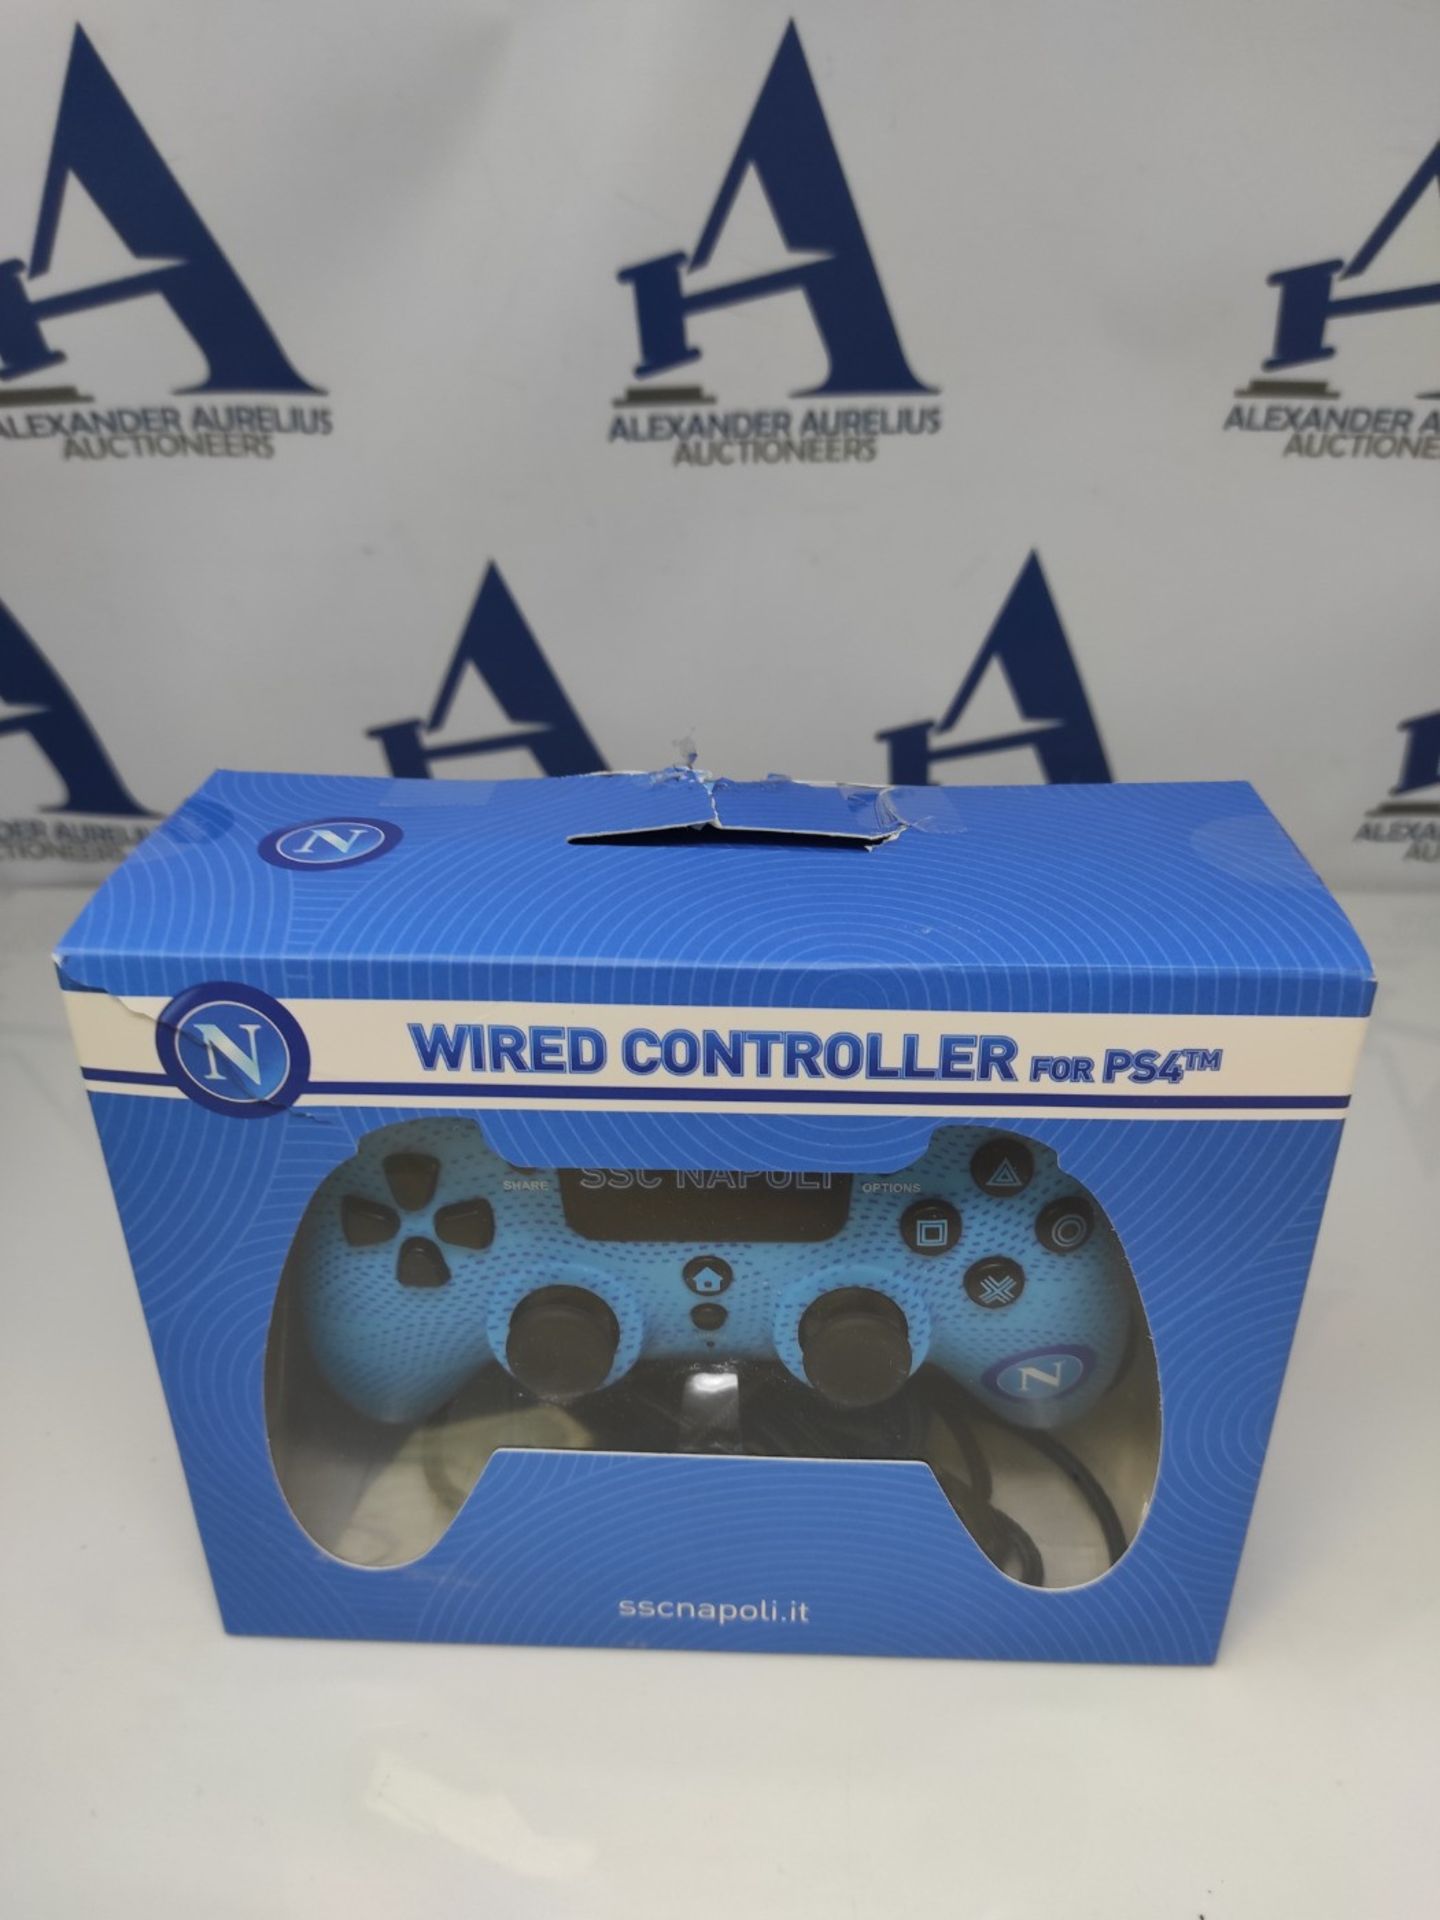 WIRED CONTROLLER SSC NAPOLI 2.00 - Image 2 of 3